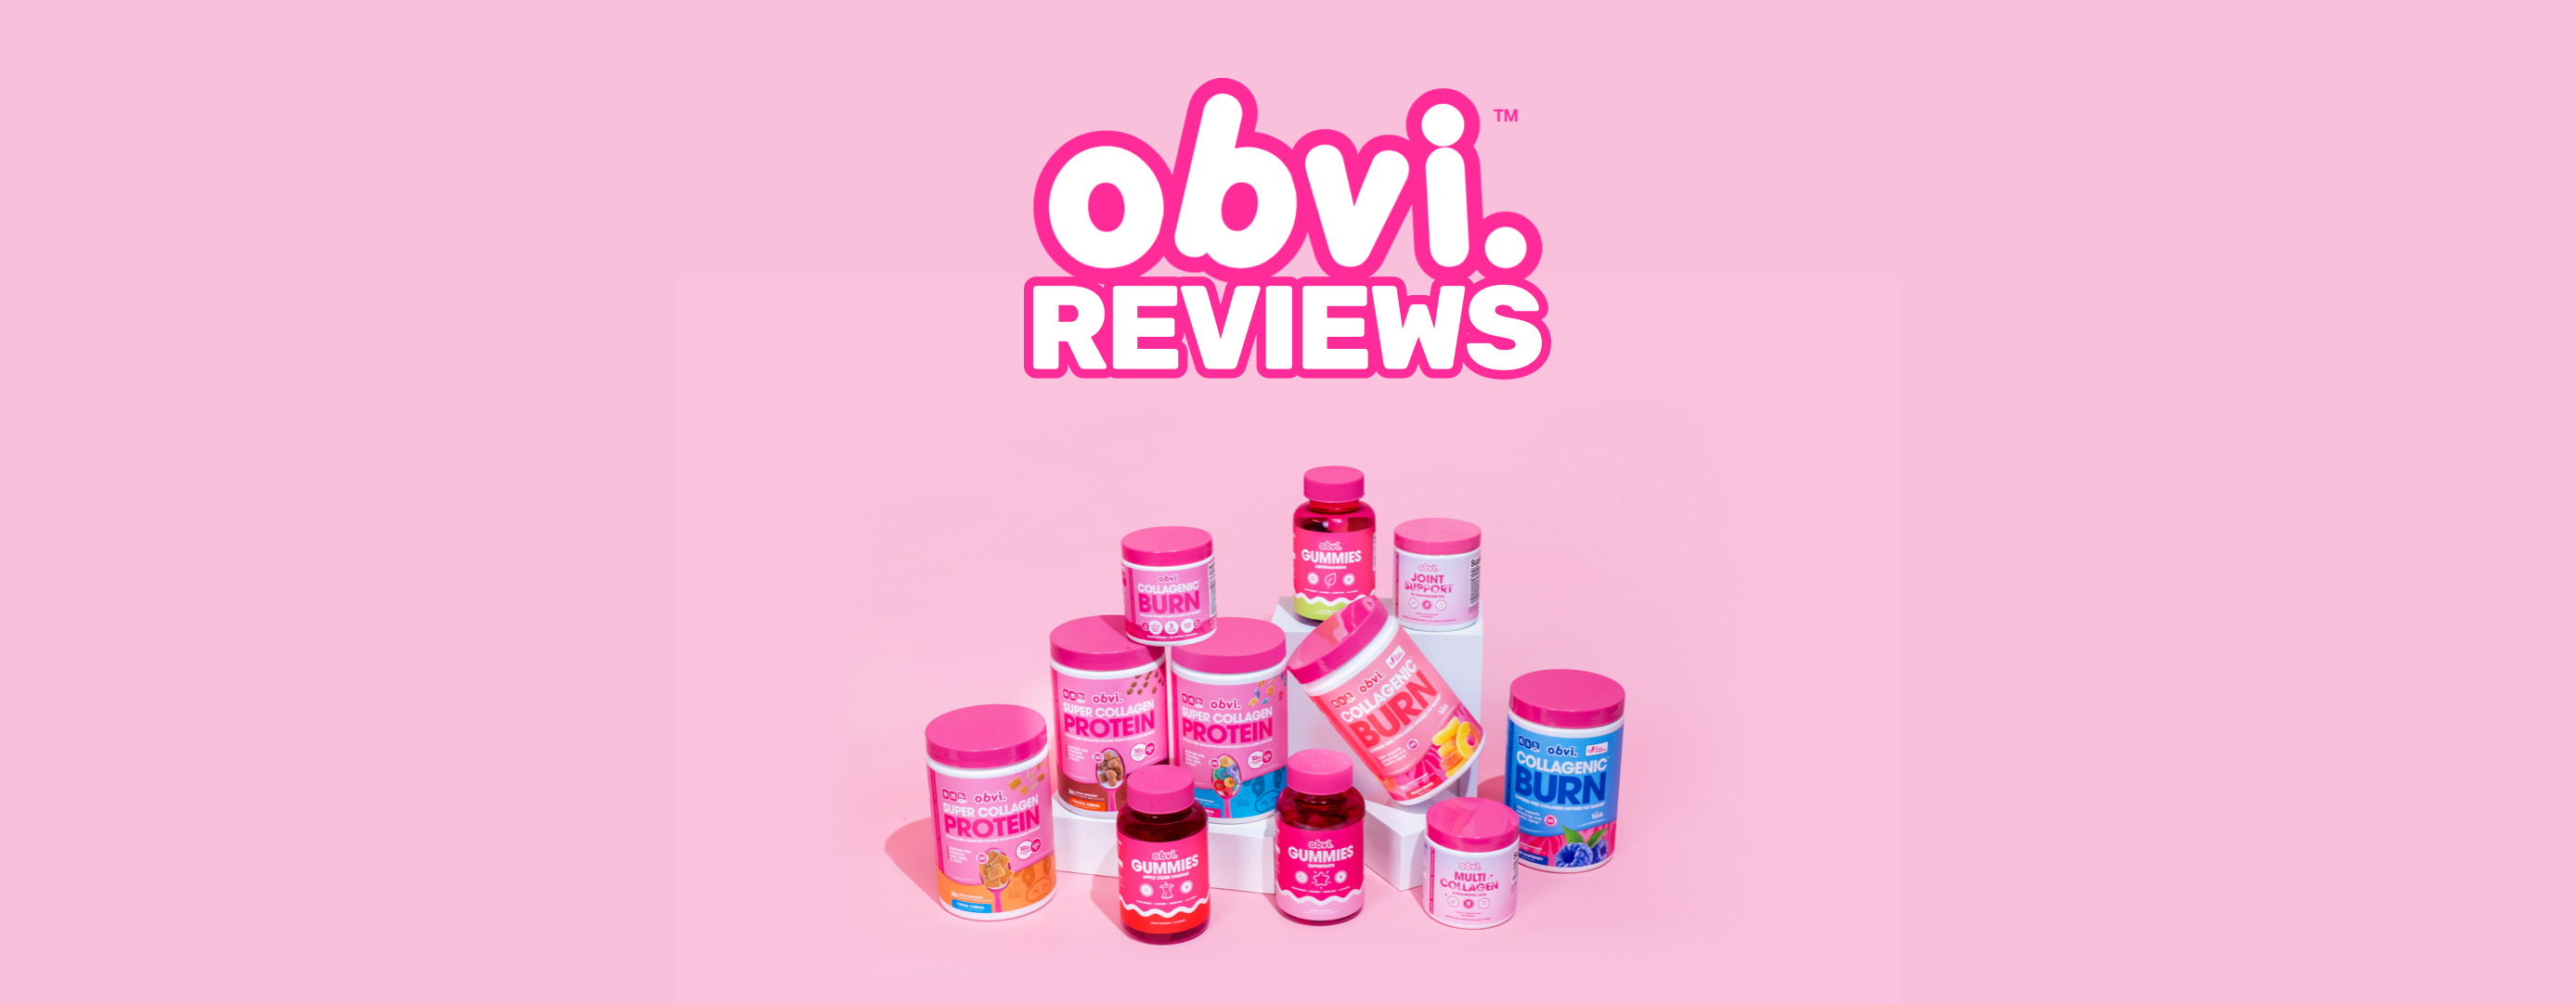 Obvi Review Banner